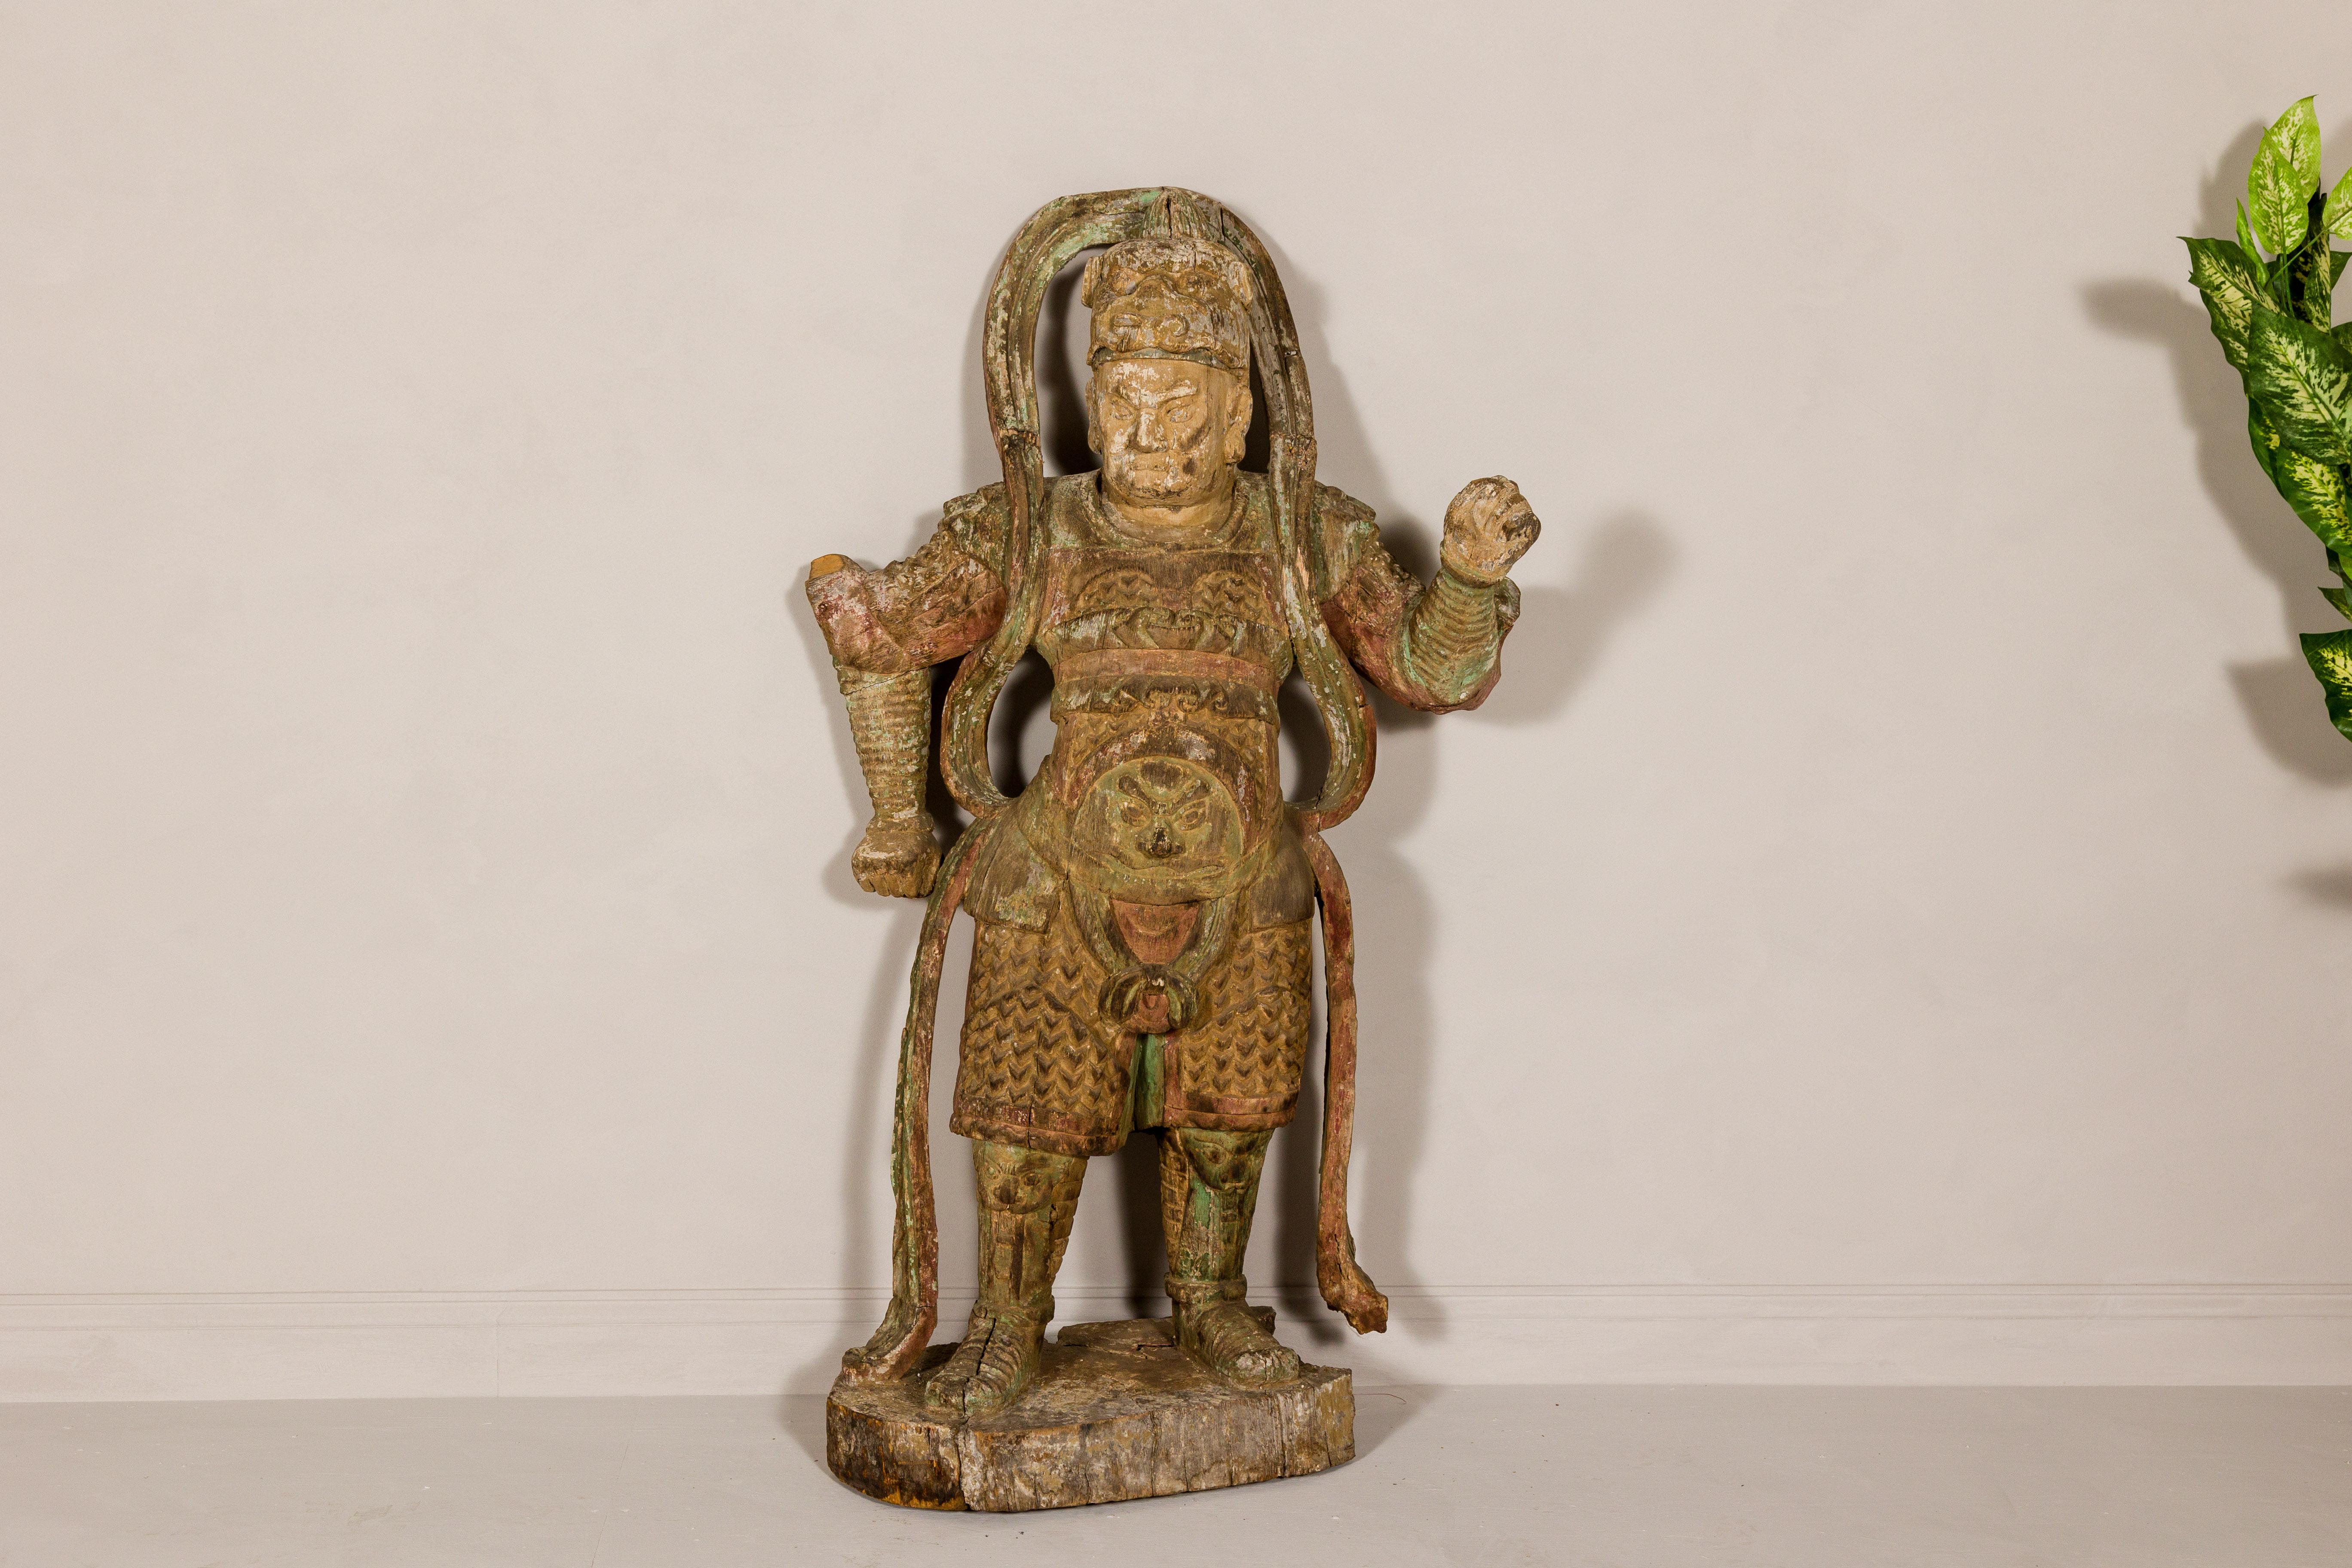 A hand-carved Japanese Samurai warrior statue from the 19th century with traces of a red and green polychromy.  Immersed in profound historical allure, this 19th-century Japanese Samurai warrior statue stands as a testament to the rich cultural